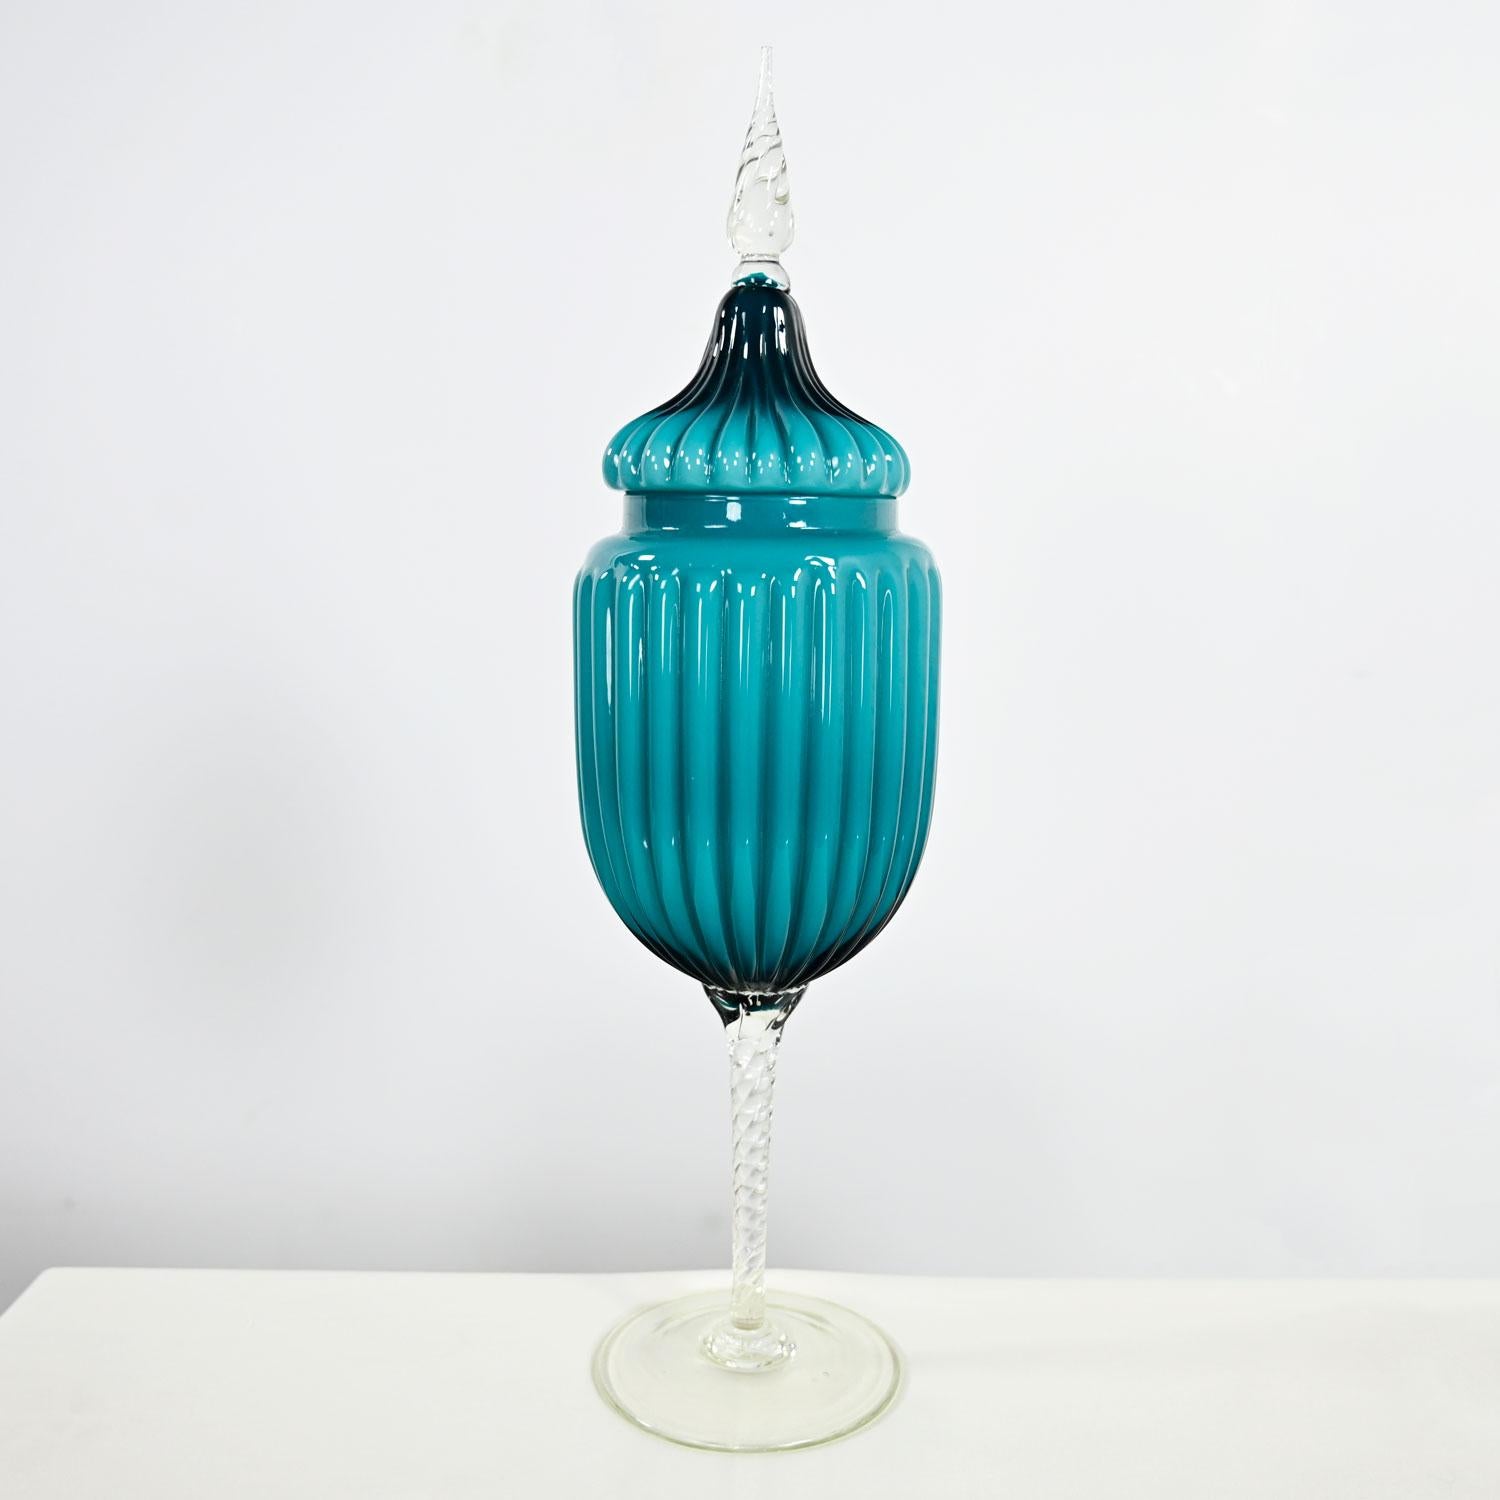 Empoli Italian Cased Glass Lidded Compote Circus Tent Jar in Peacock Blue 8